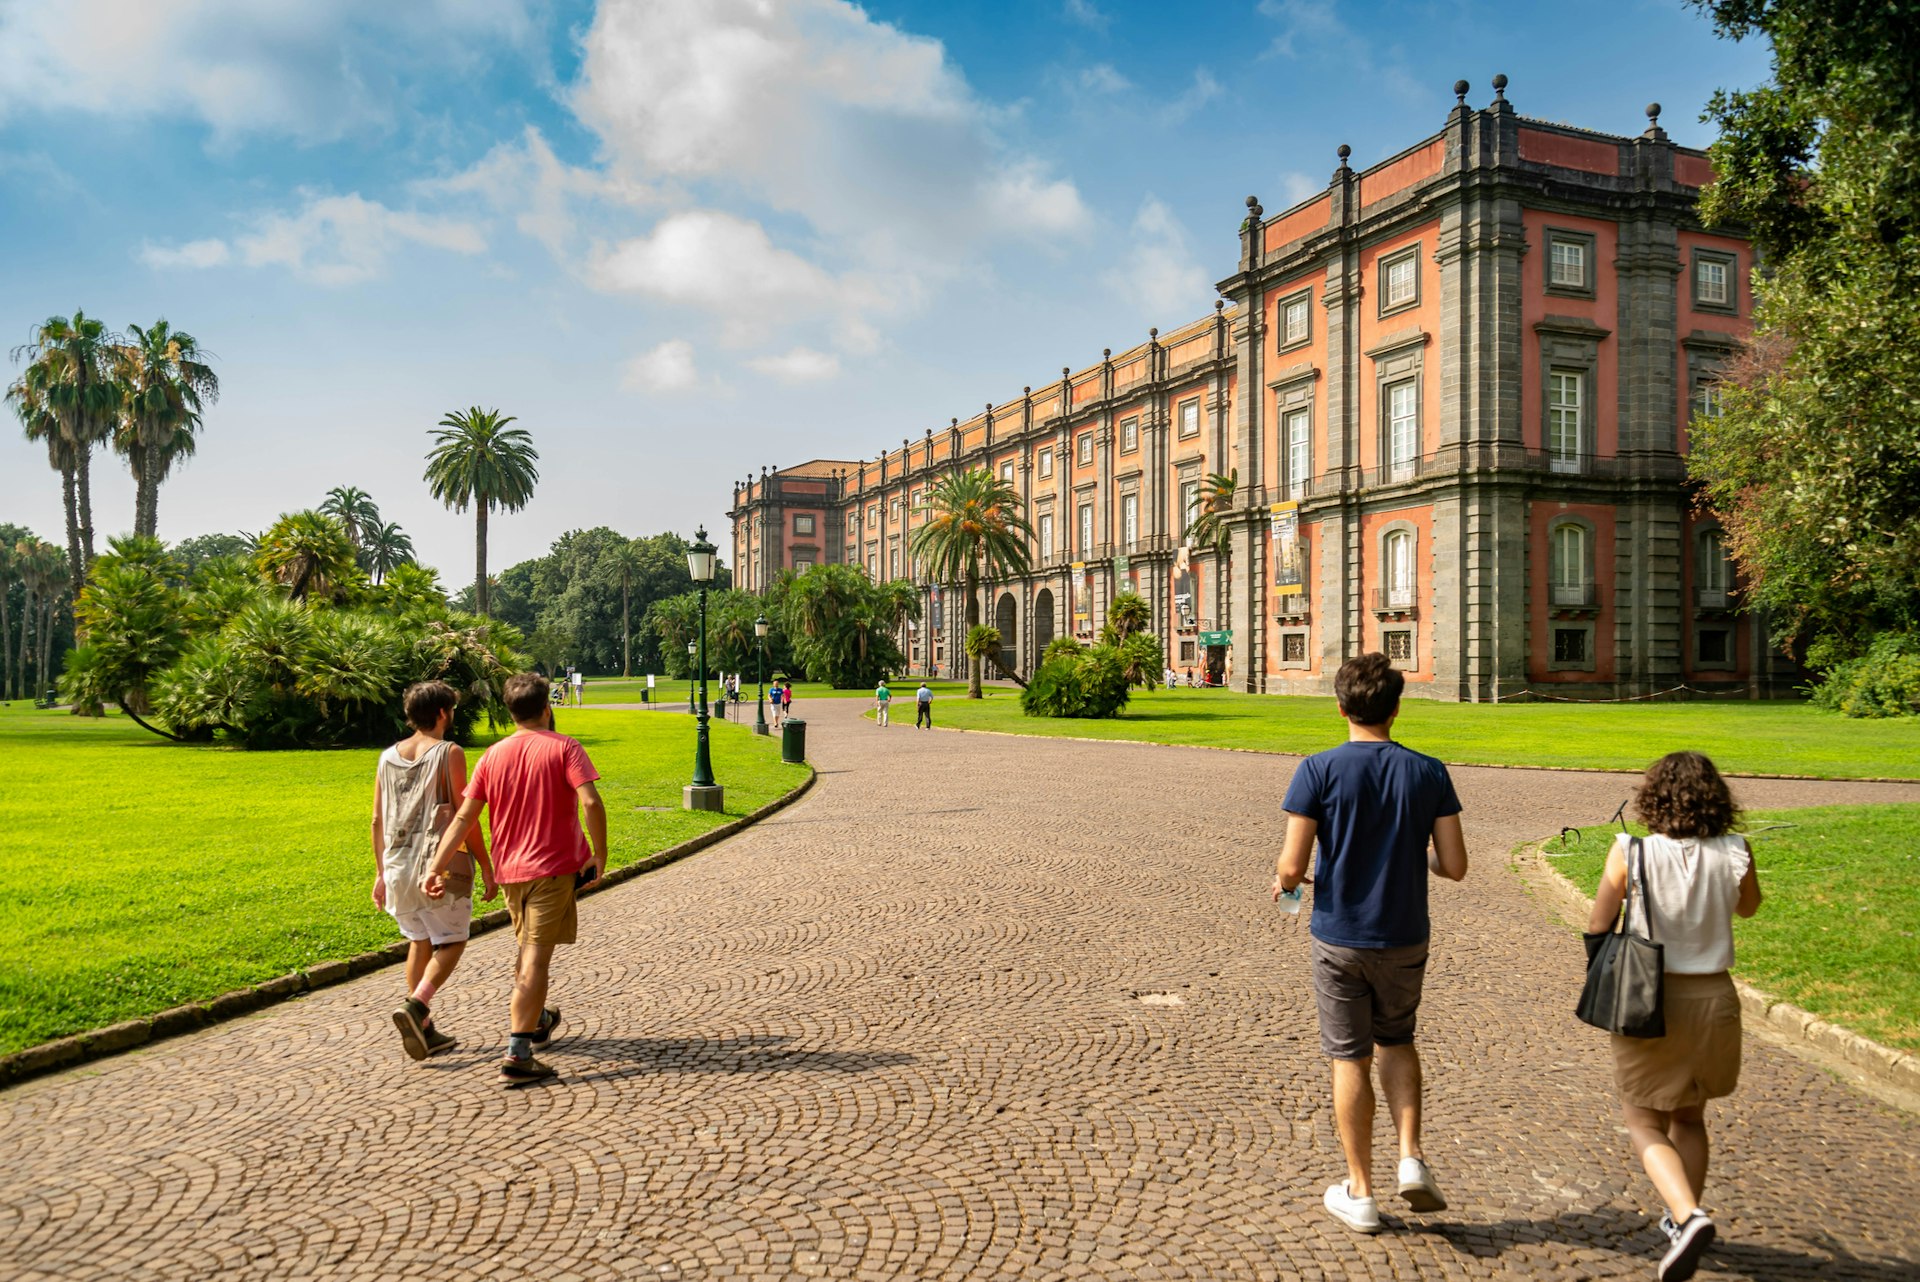 People walk through the park towards the Palazzo Real di Capodimonte, one of the most important Italian museums